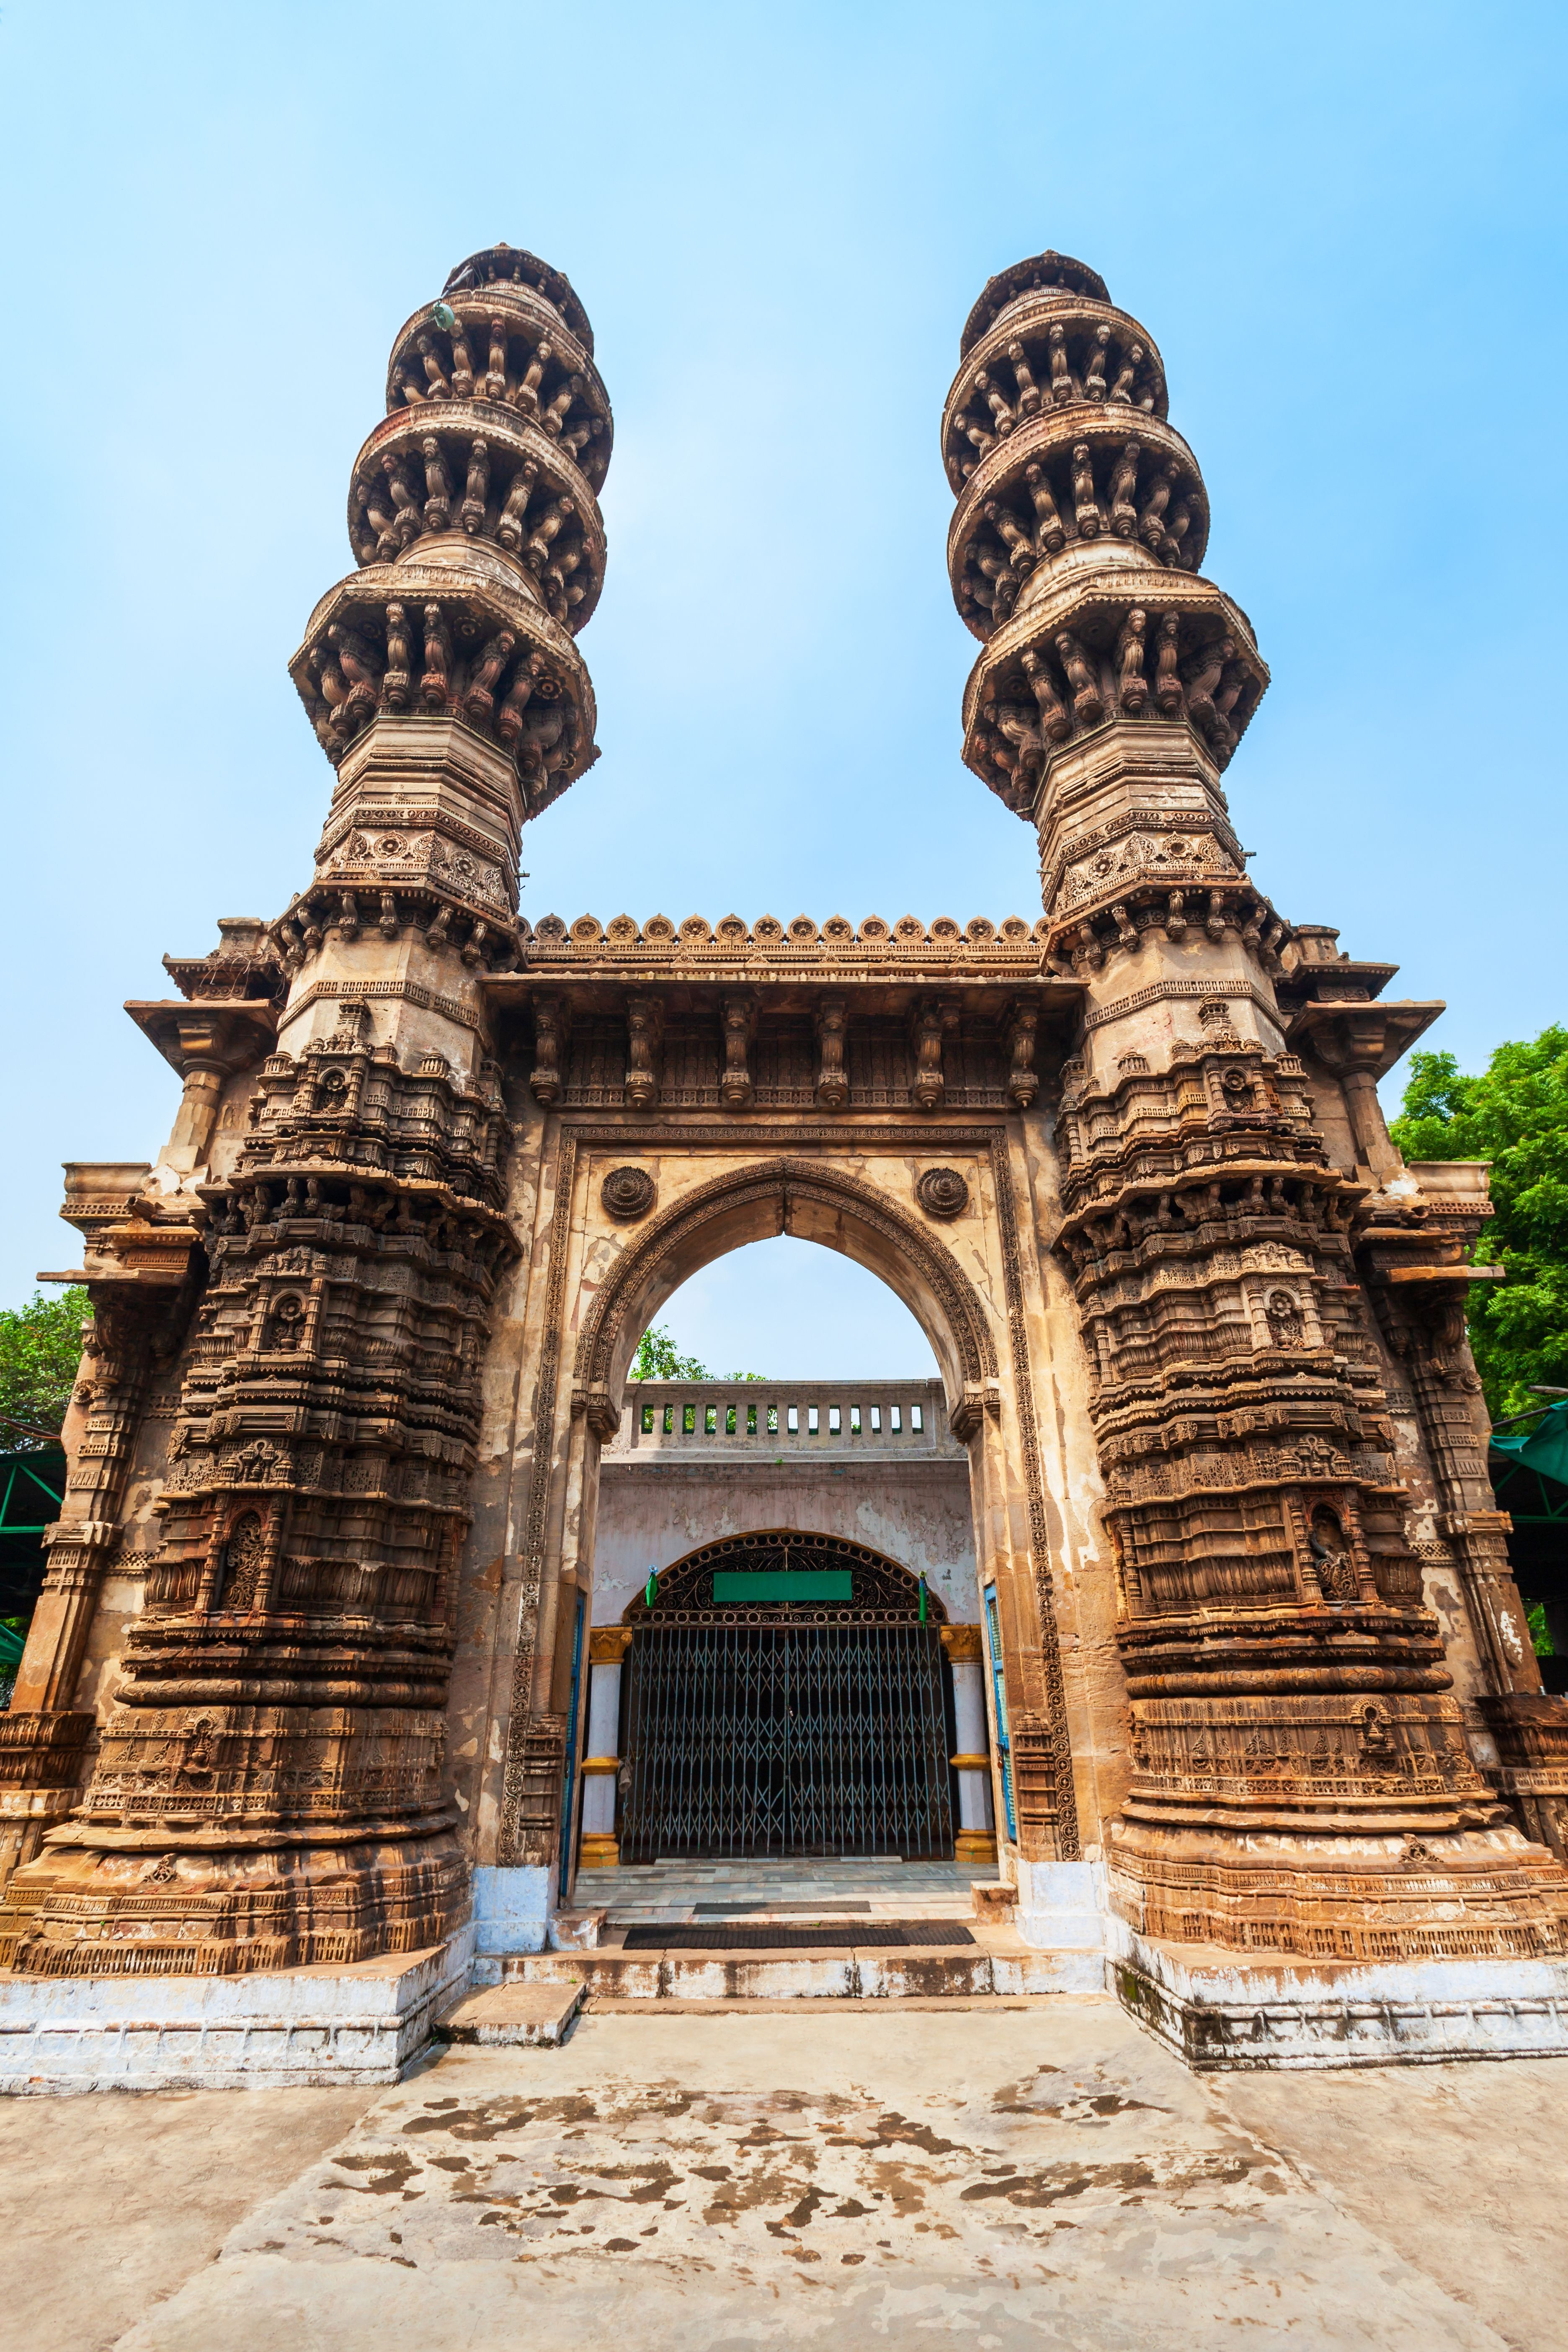 Sidi Bashir Mosque is a former mosque in the city of Ahmedabad, Gujarat